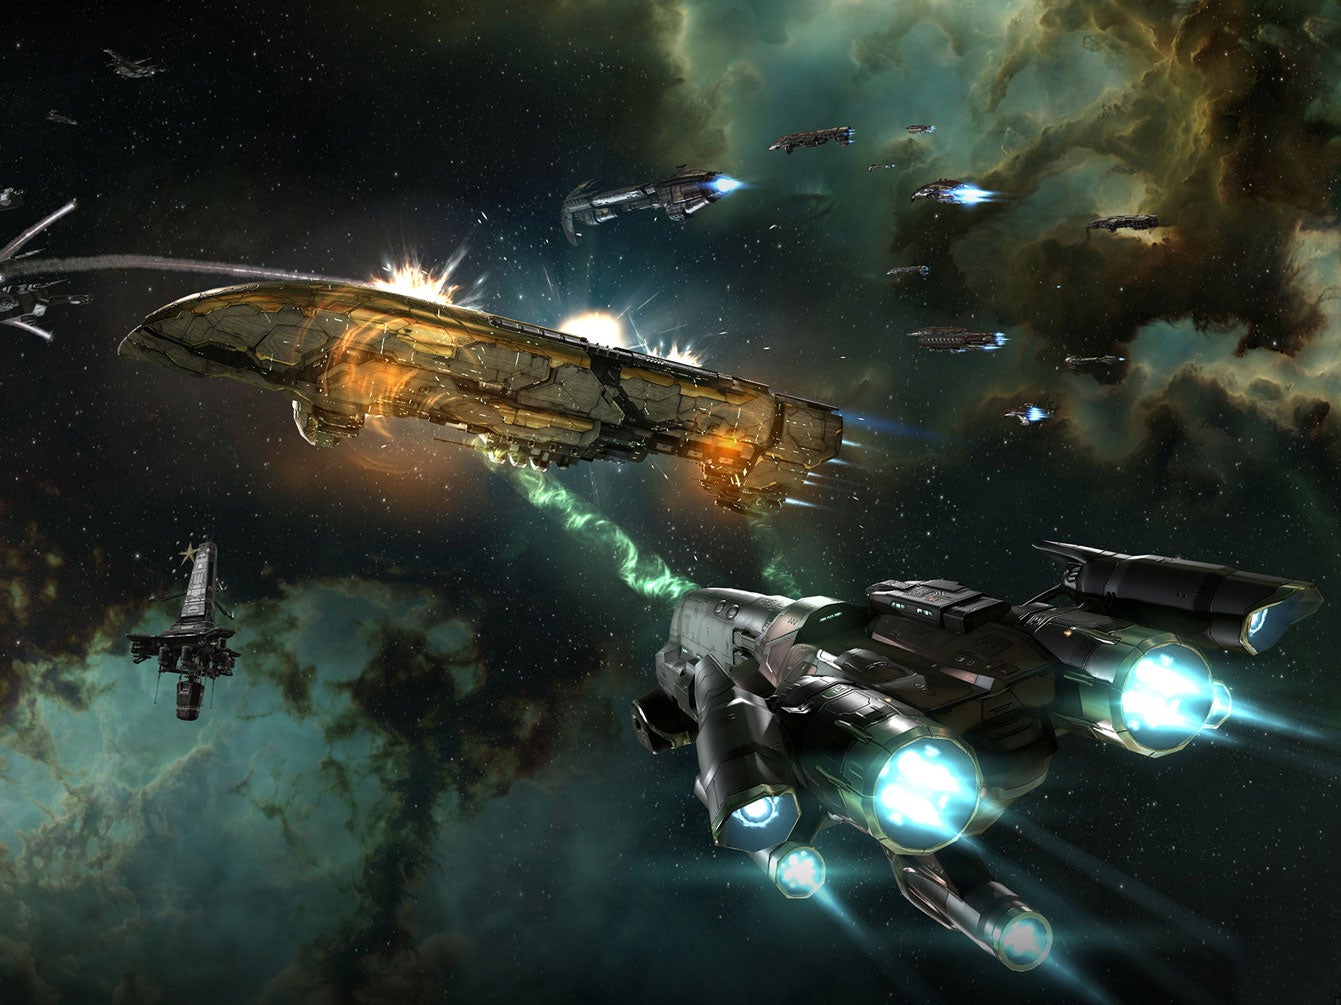 EVE Online players will be rewarded with in-game currency for taking part in the project